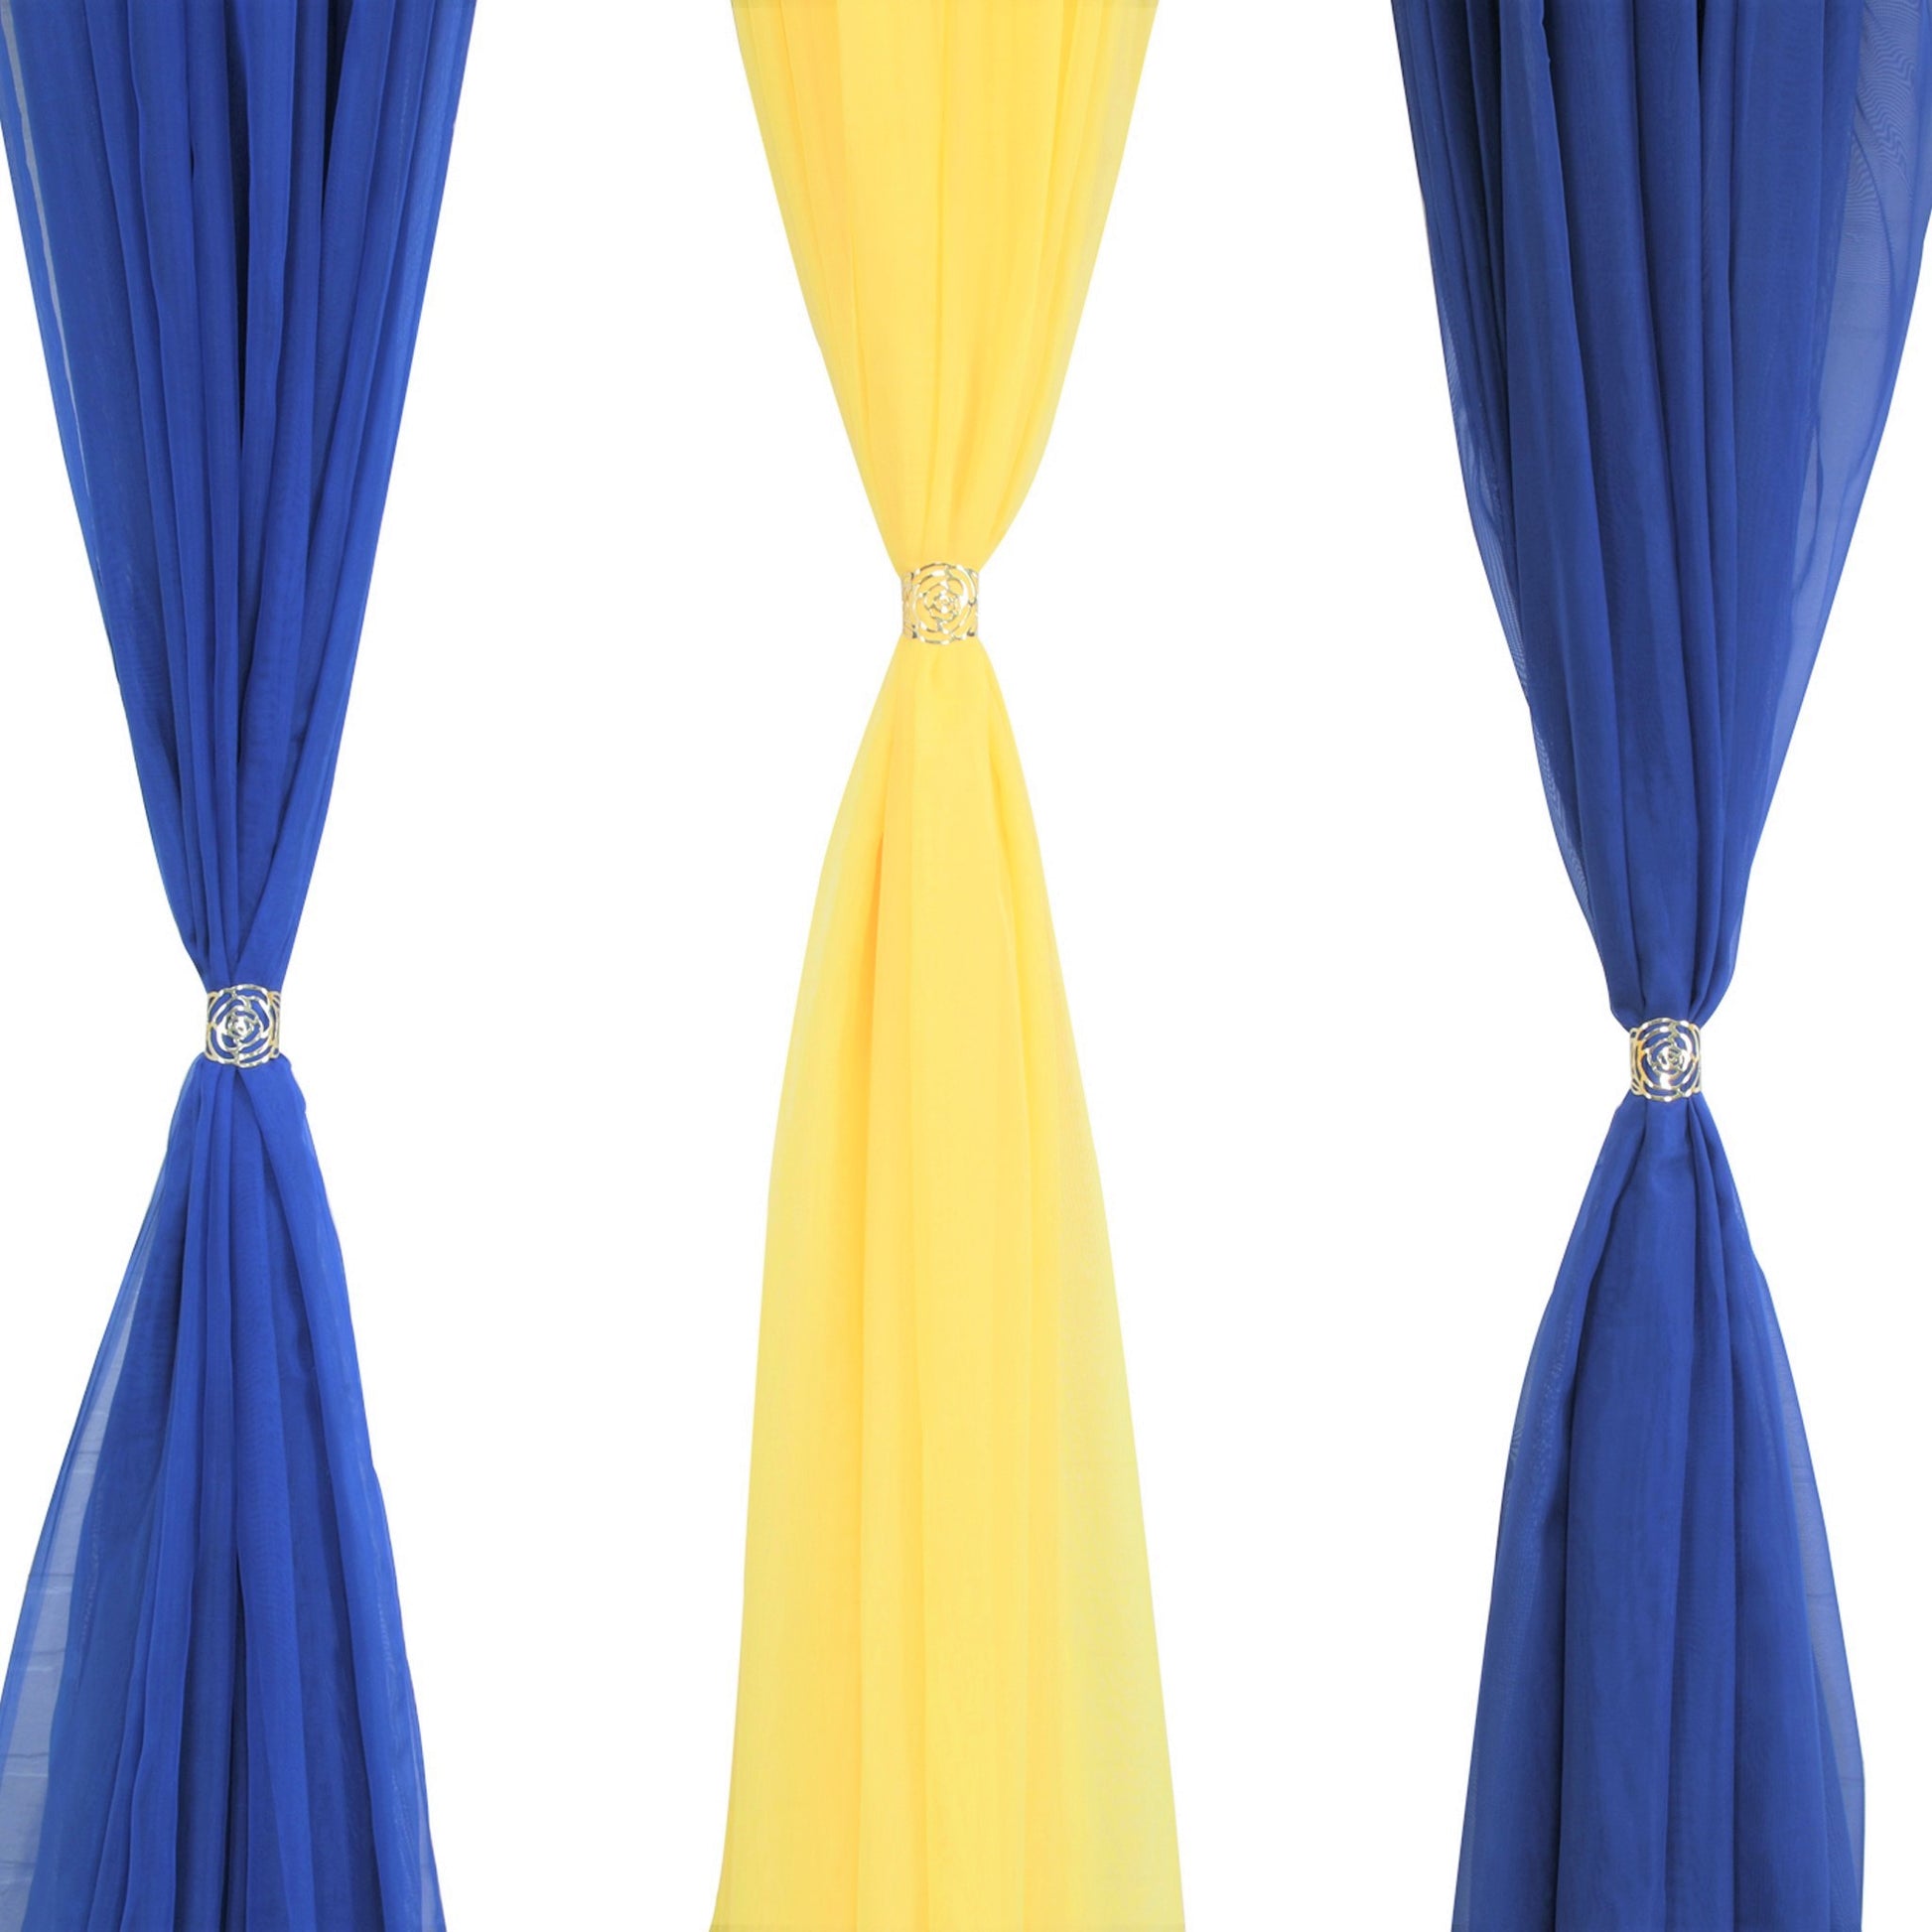 Sheer Voile Flame Retardant (FR) 12ft H x 118" W Drape/Backdrop Curtain Panel - Canary Yellow